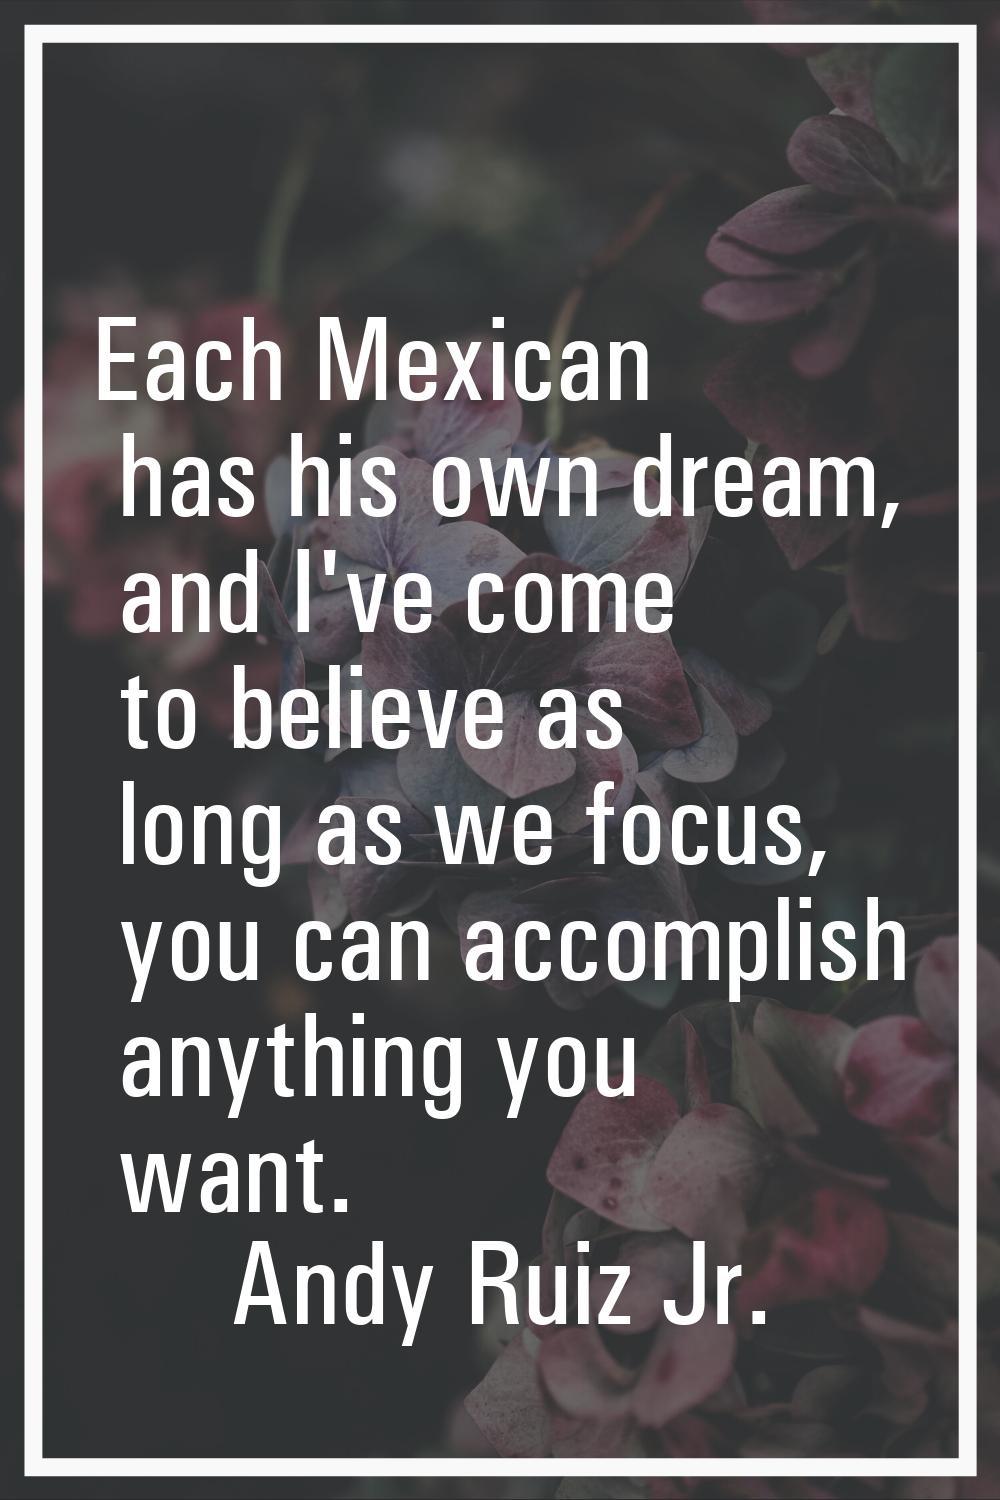 Each Mexican has his own dream, and I've come to believe as long as we focus, you can accomplish an